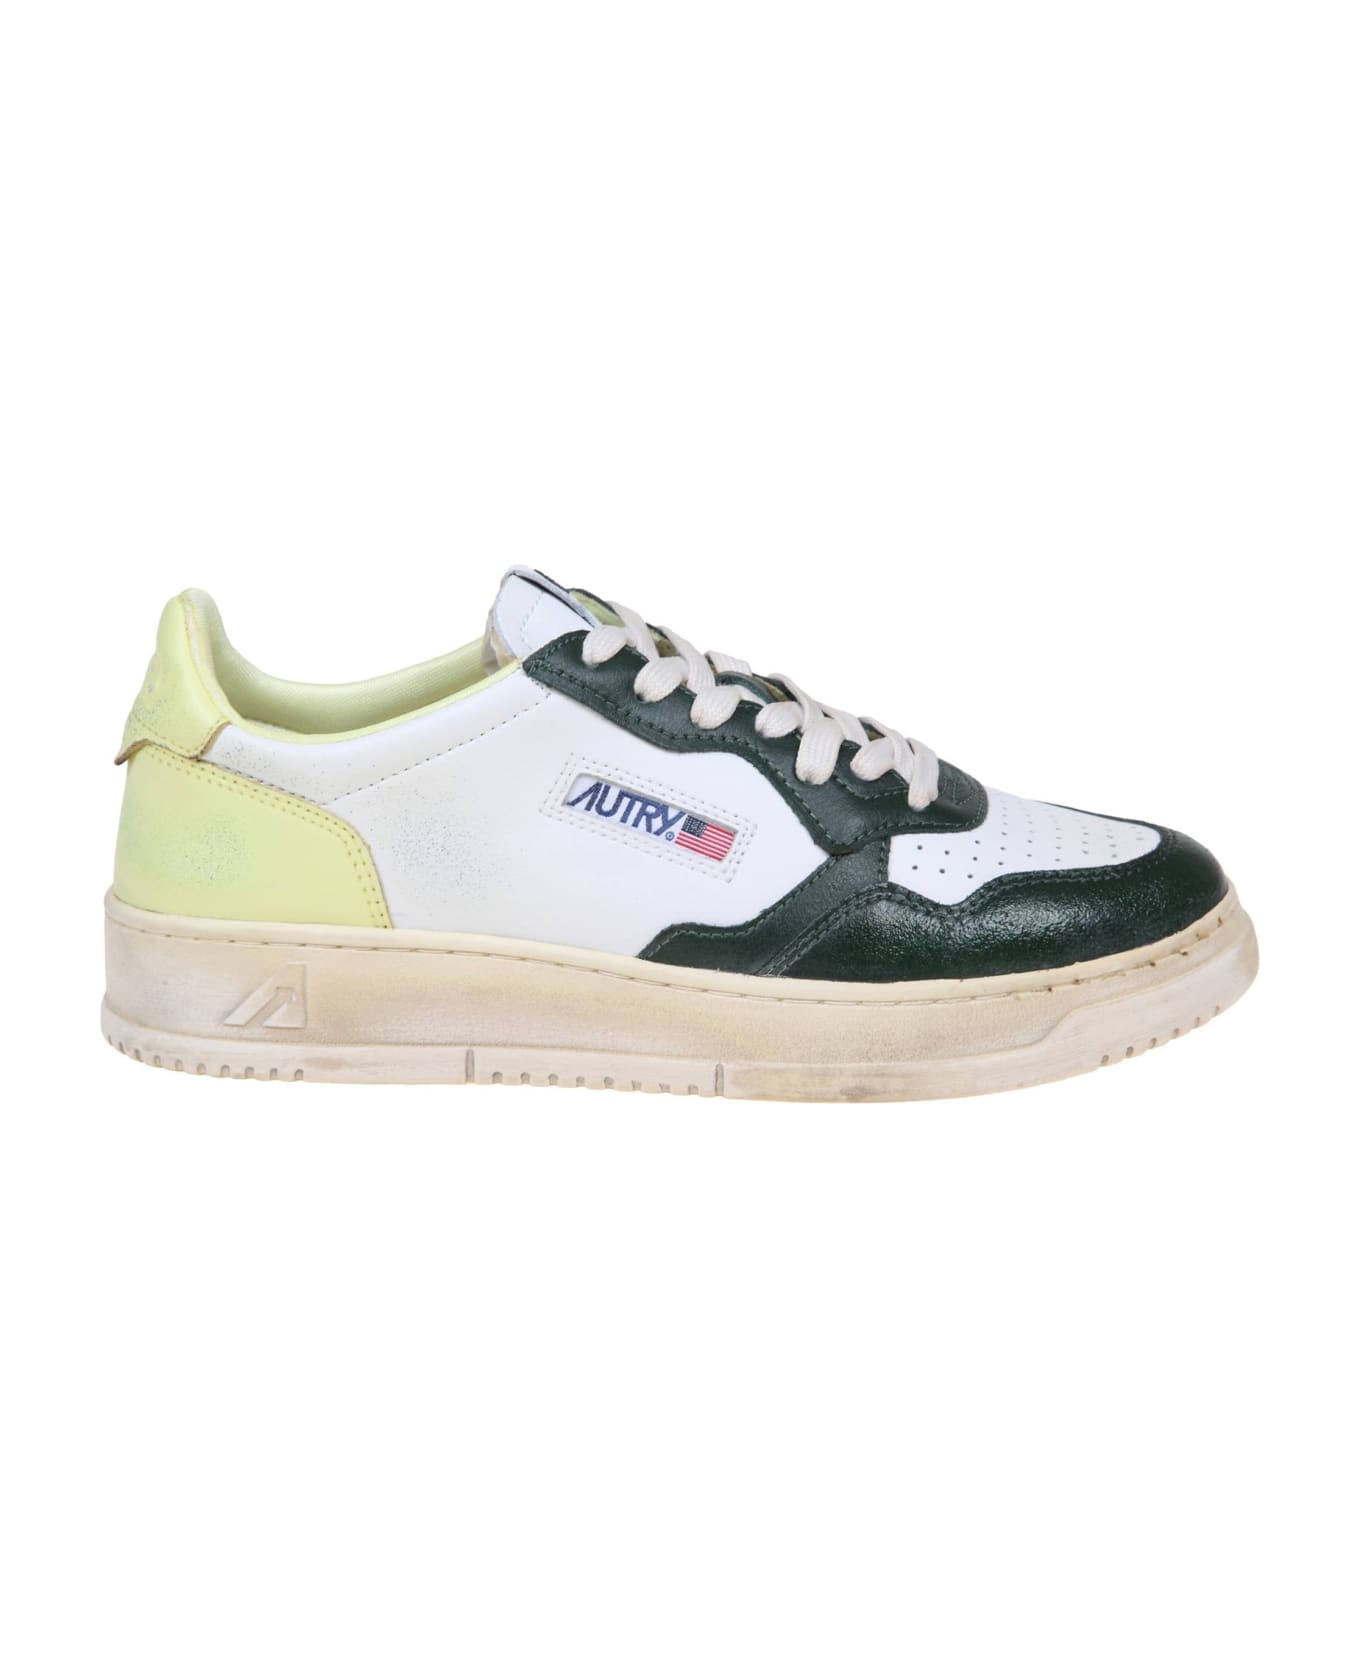 Autry Sneakers In Super Vintage Leather - Multicolor